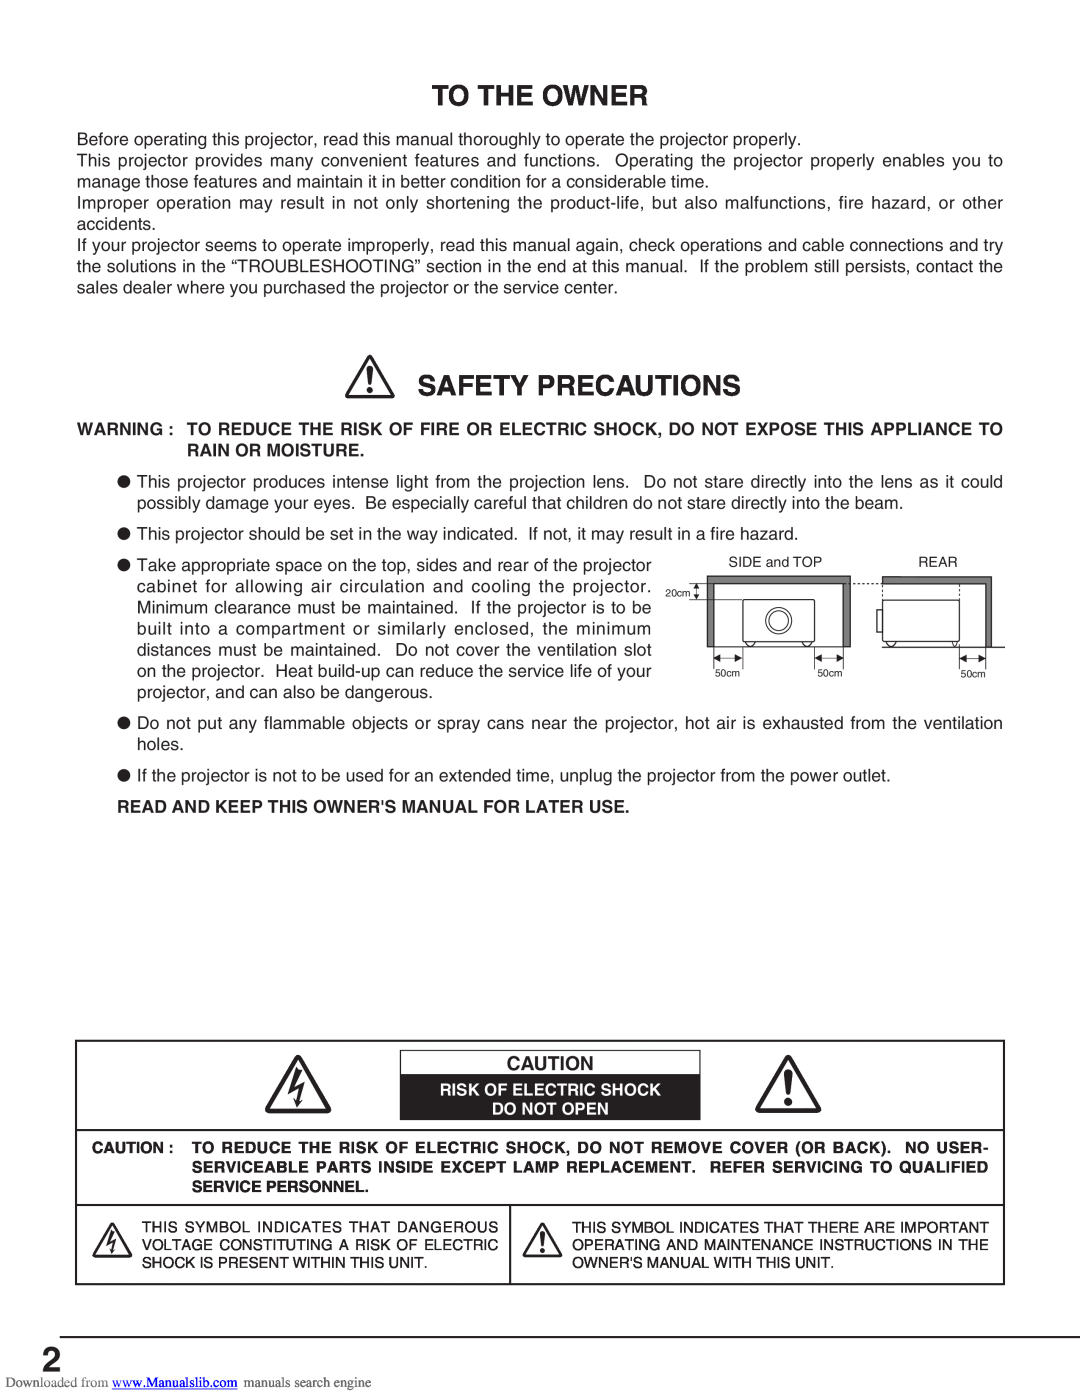 Canon LV-S2 owner manual To The Owner, Safety Precautions, Read And Keep This Owners Manual For Later Use 